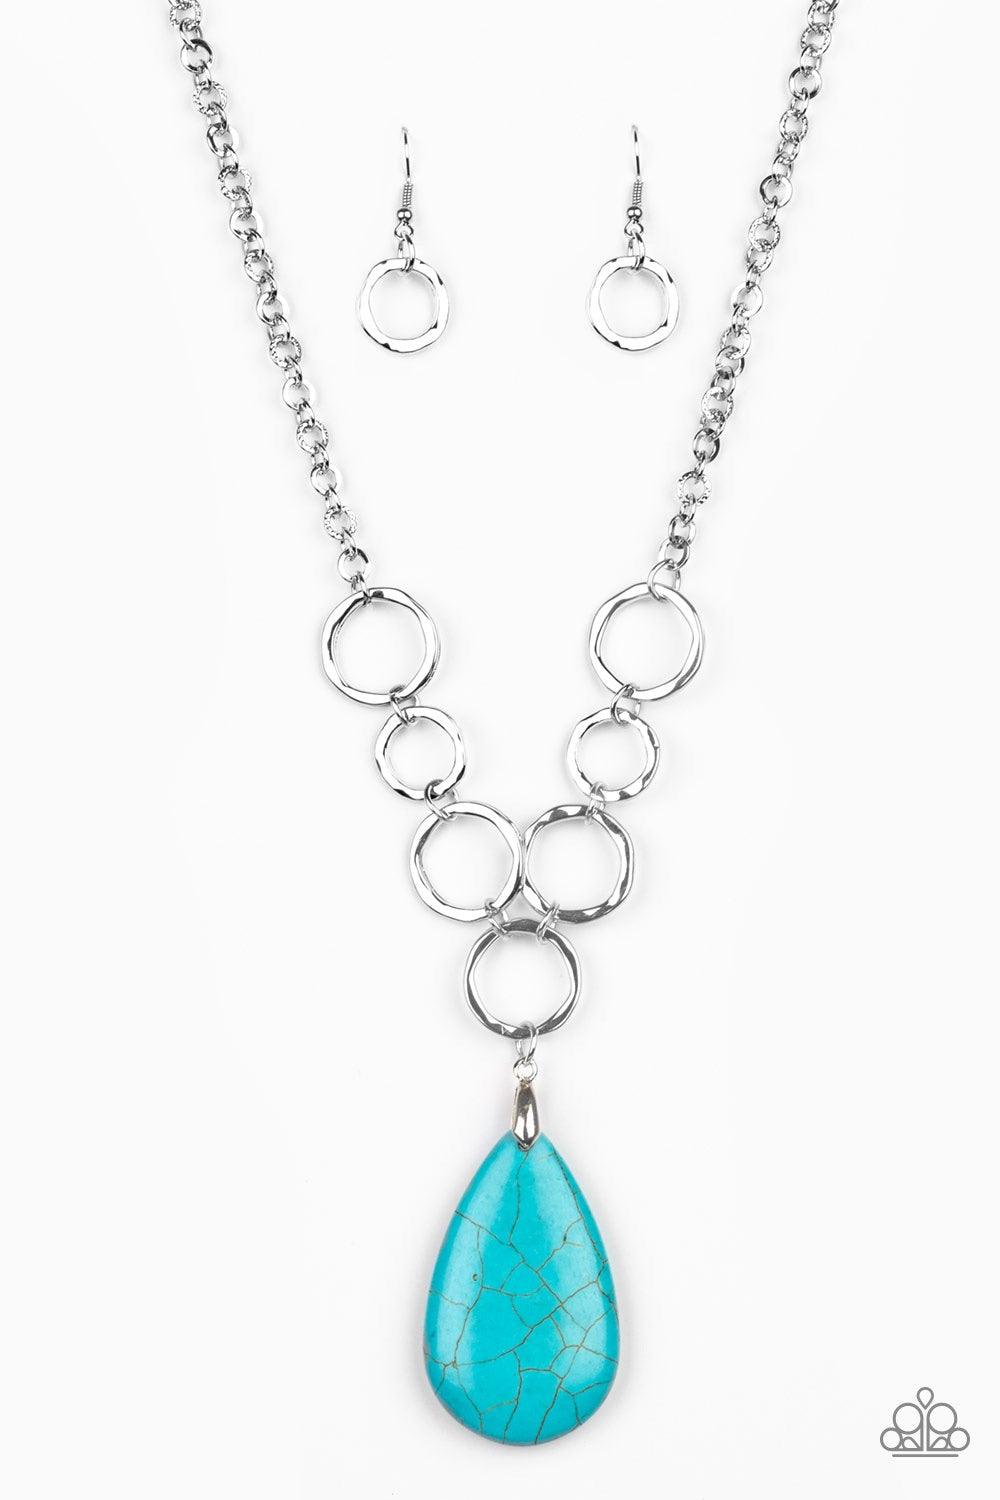 Paparazzi Accessories Livin on A Prairie - Blue A collection of silver links give way to a refreshing turquoise stone teardrop, creating a tranquil pendant below the collar. Each silver ring is hammered in texture, adding an artisanal touch to the piece.